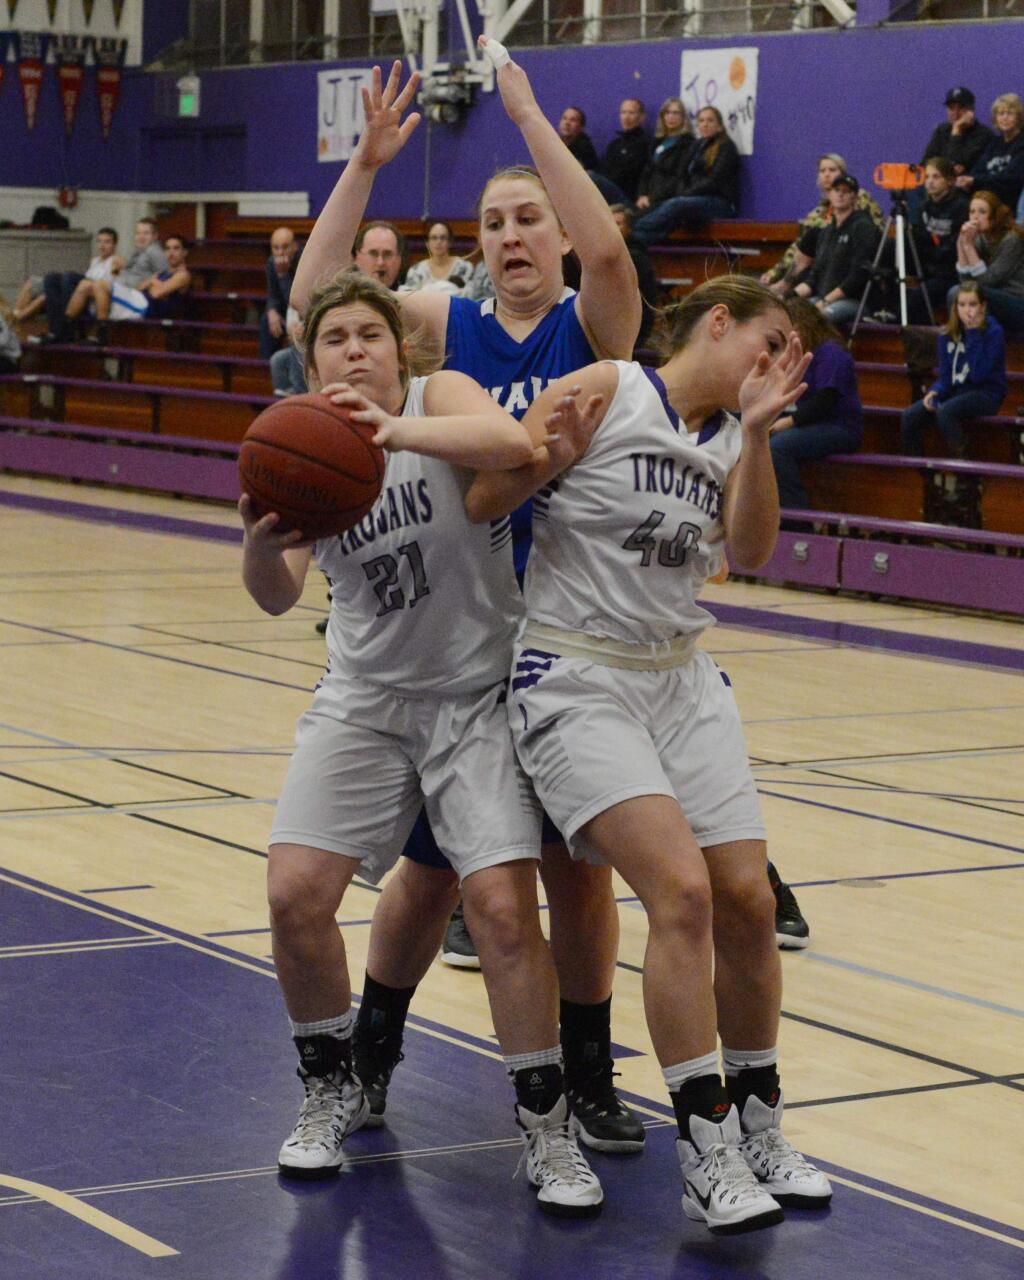 SUMNER FOWLER/FOR THE ARGUS-COURIERPetaluma's Cassie Baddeley bumps into teammate Joelle Krist as she tries to go up for a shot in a 70-59 win over Analy in a SCL playoff game.